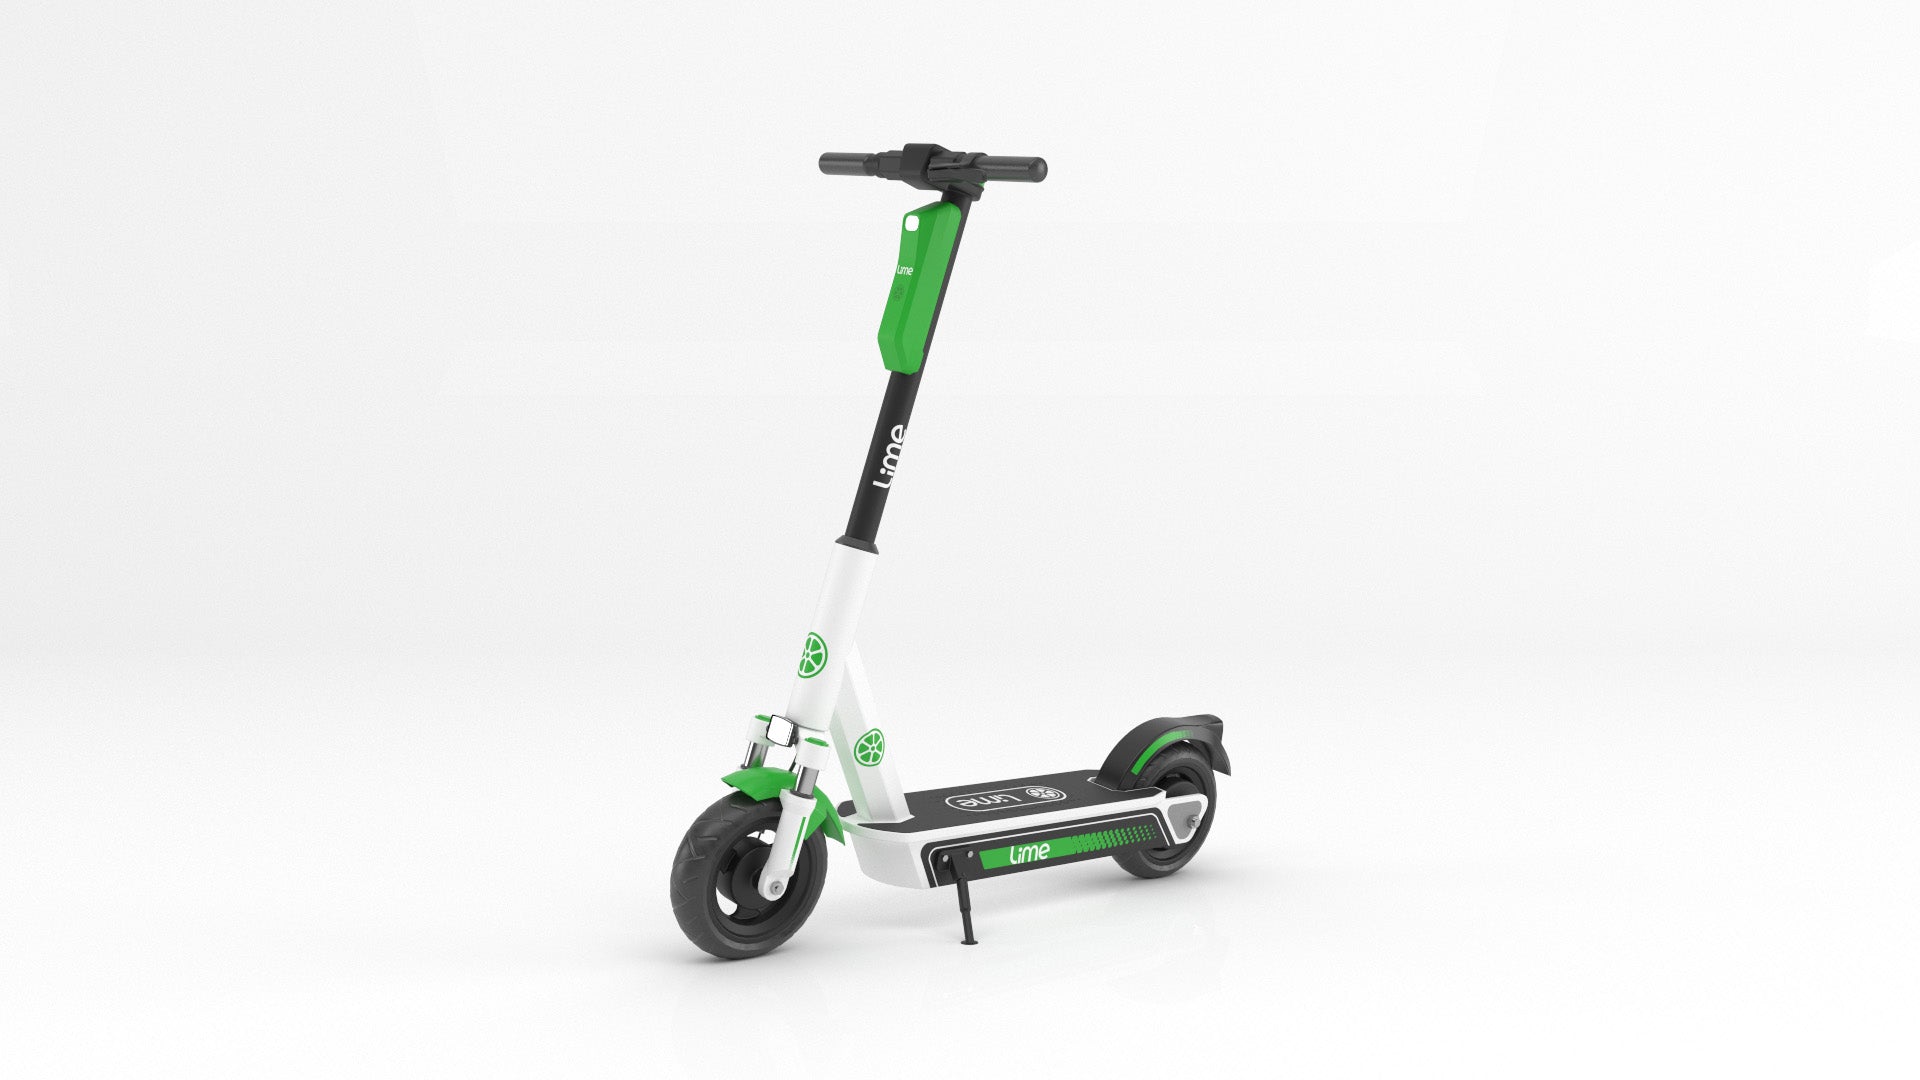 Lime Scooter 3D model